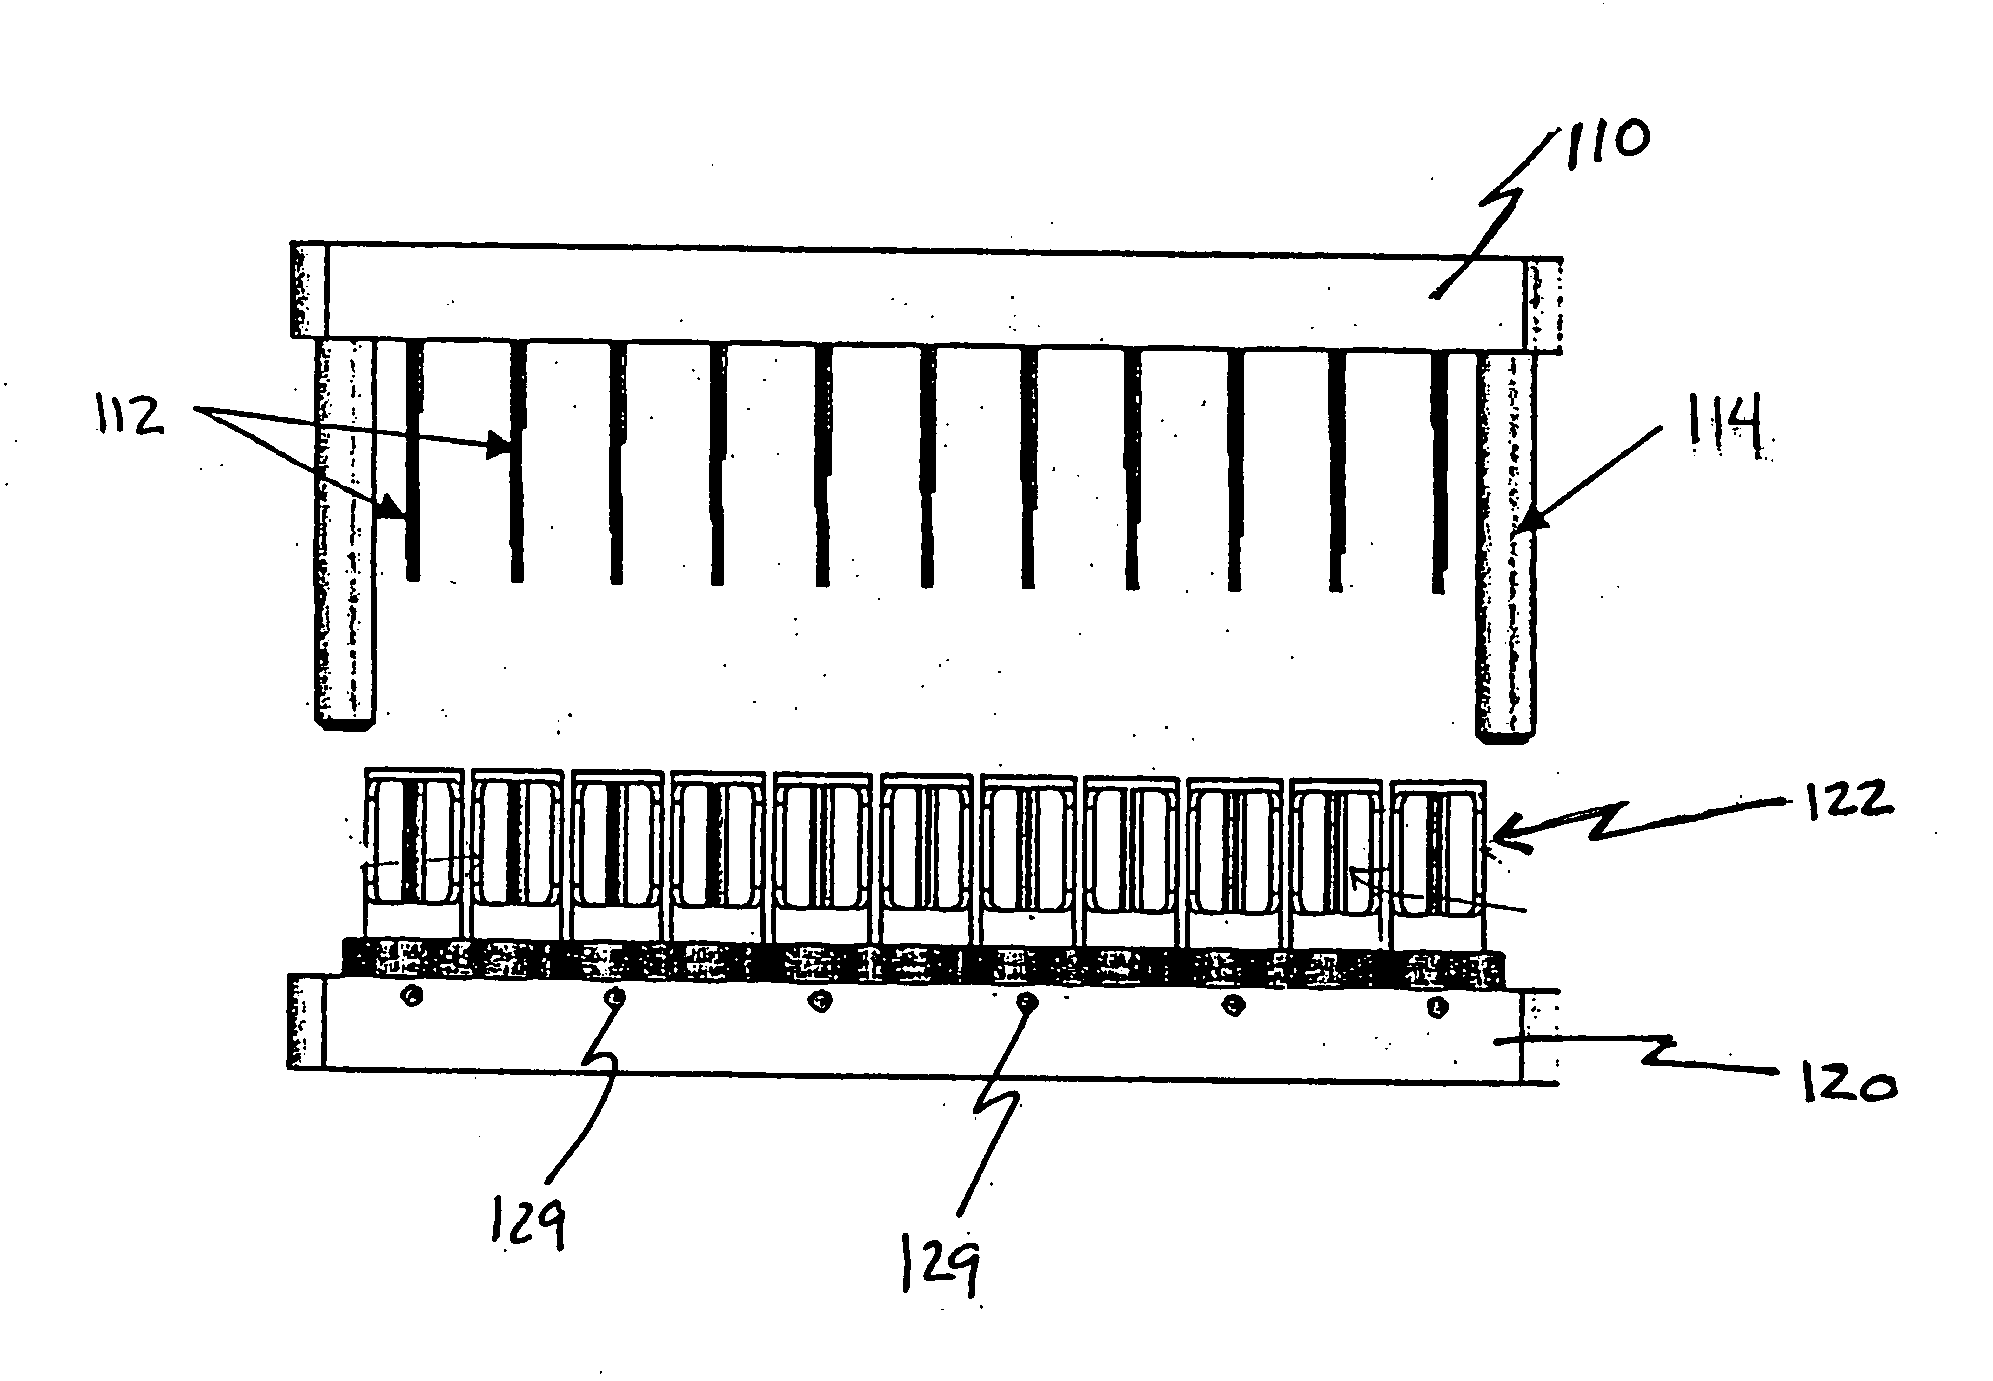 Systems and methods for fatigue testing stents